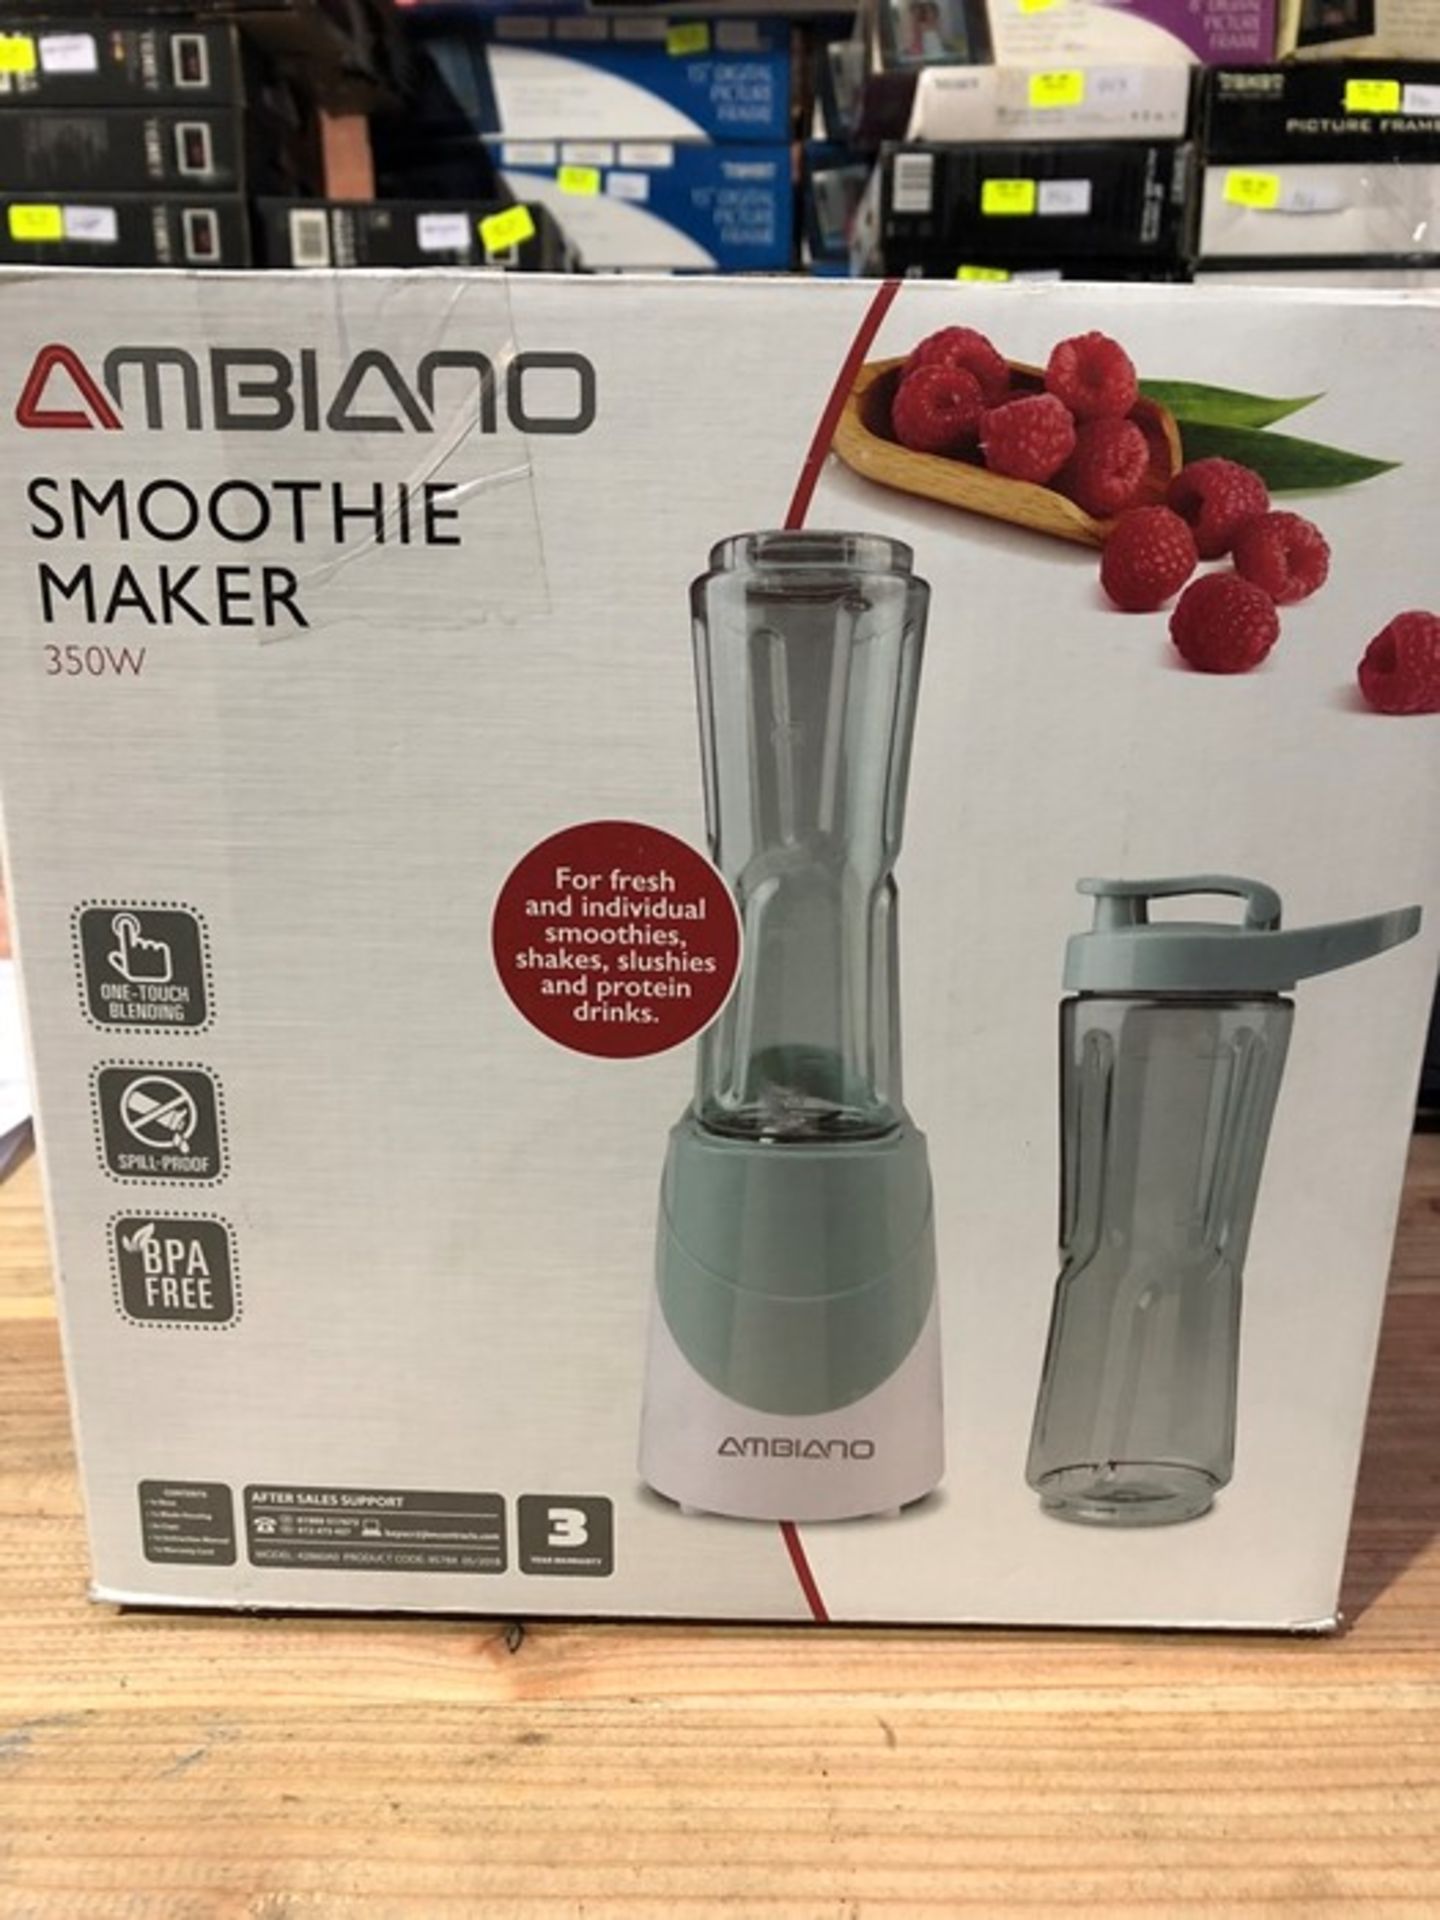 1 BOXED AMBIANO SMOOTHIE MAKER IN GREY / RRP £14.99 (PUBLIC VIEWING AVAILABLE)